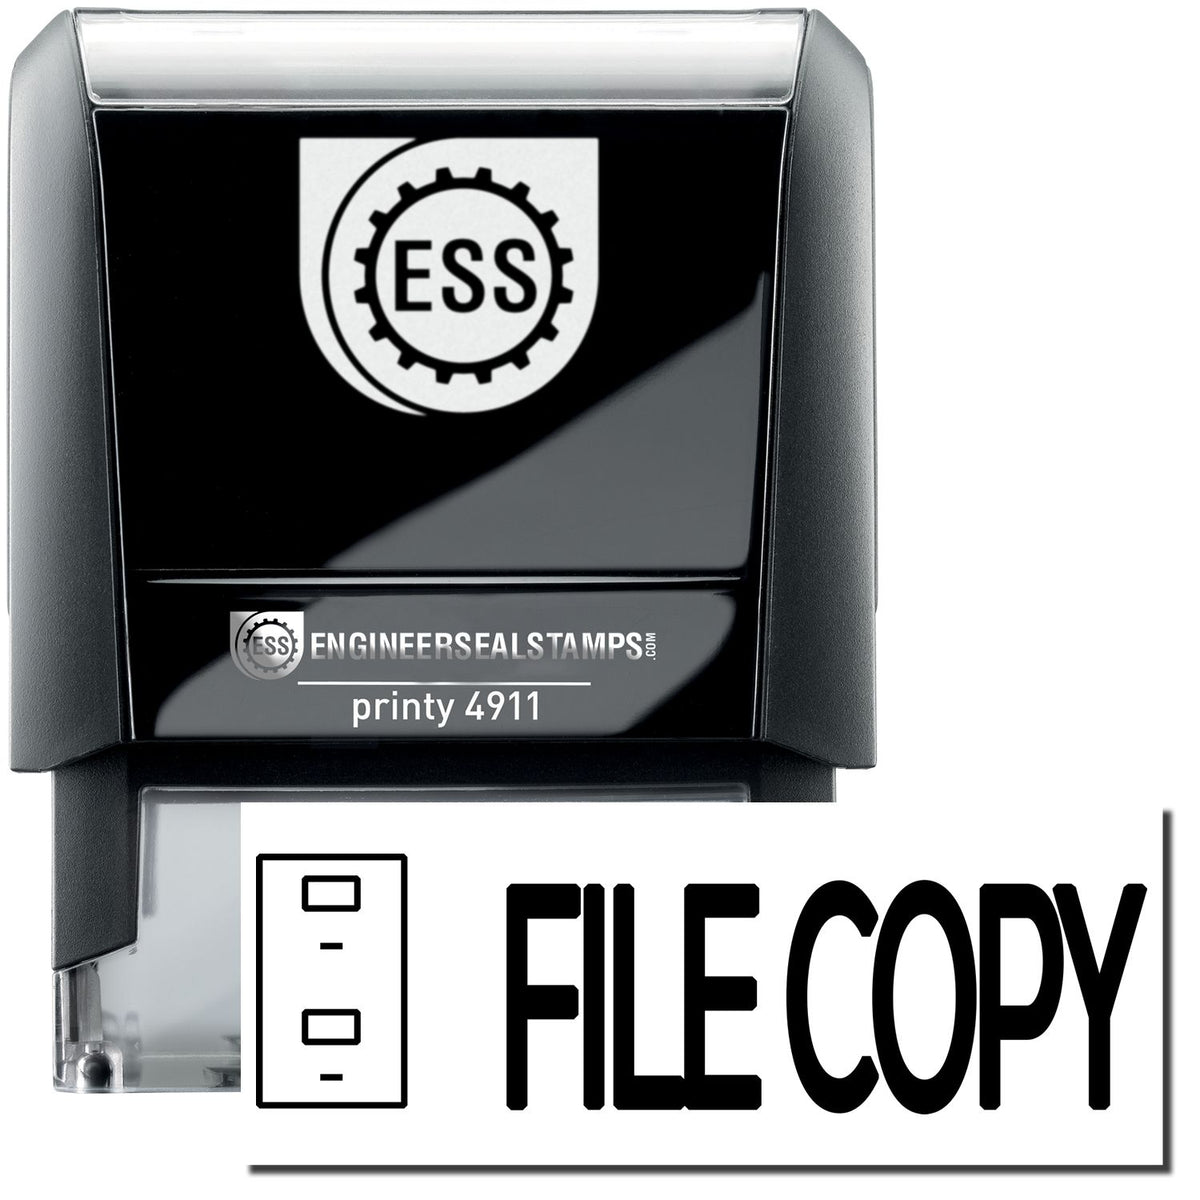 A self-inking stamp with a stamped image showing how the text &quot;FILE COPY&quot; in bold font and a small image of a drawer is displayed after stamping.